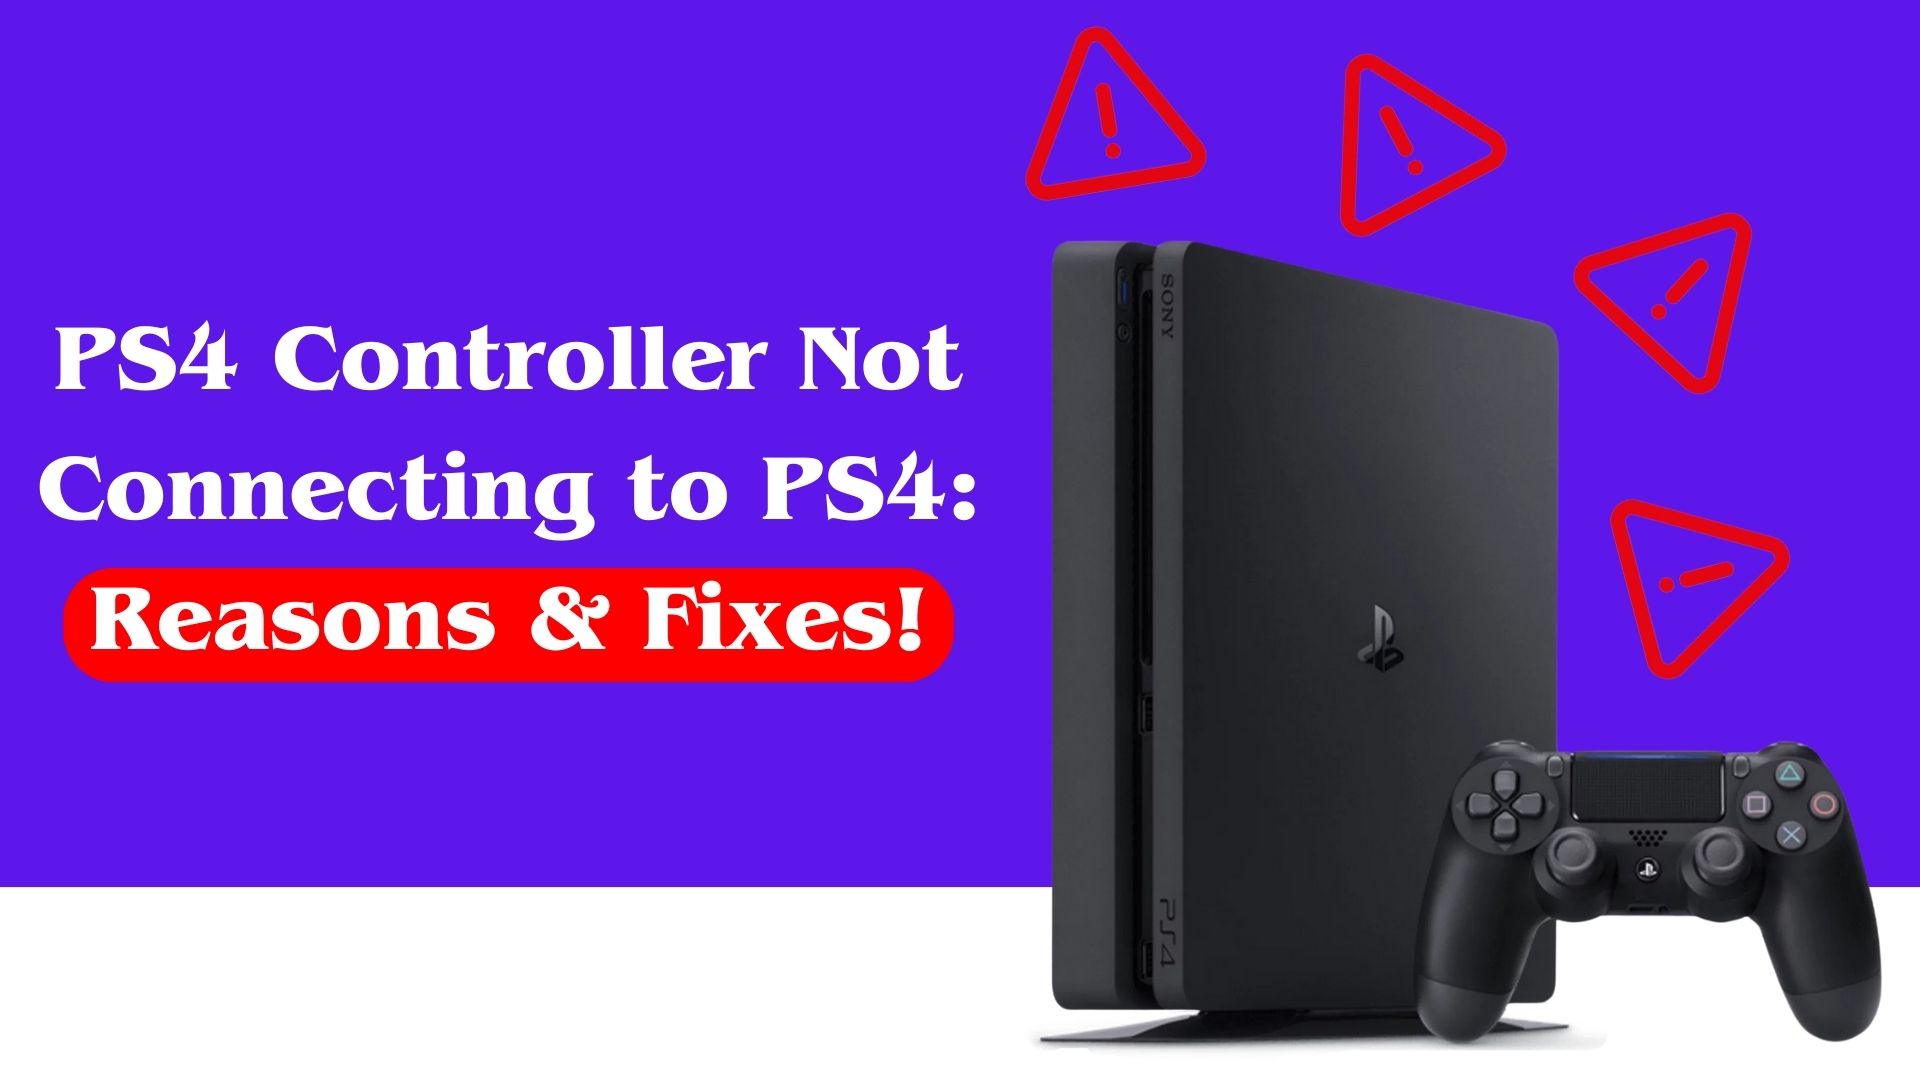 PS4 Controller Not Connecting to PS4: Reasons & Fixes!